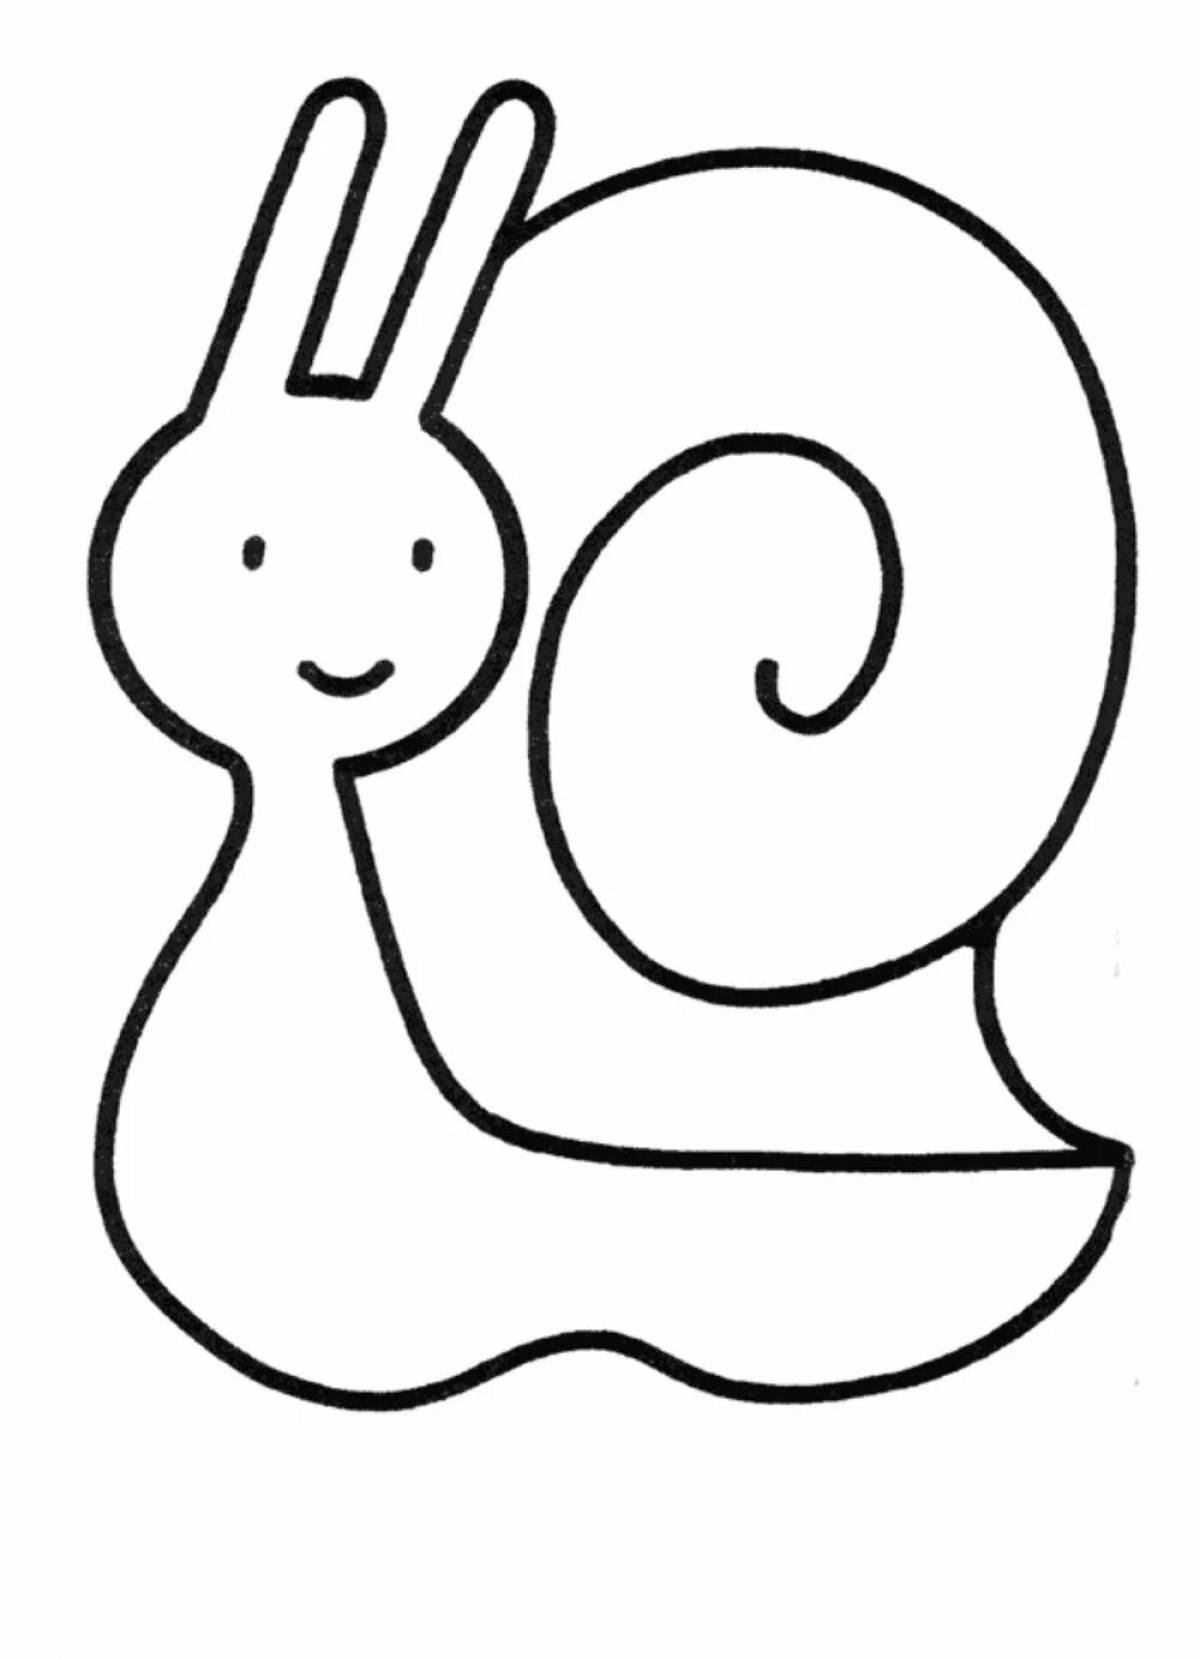 Creative snail coloring book for 3-4 year olds